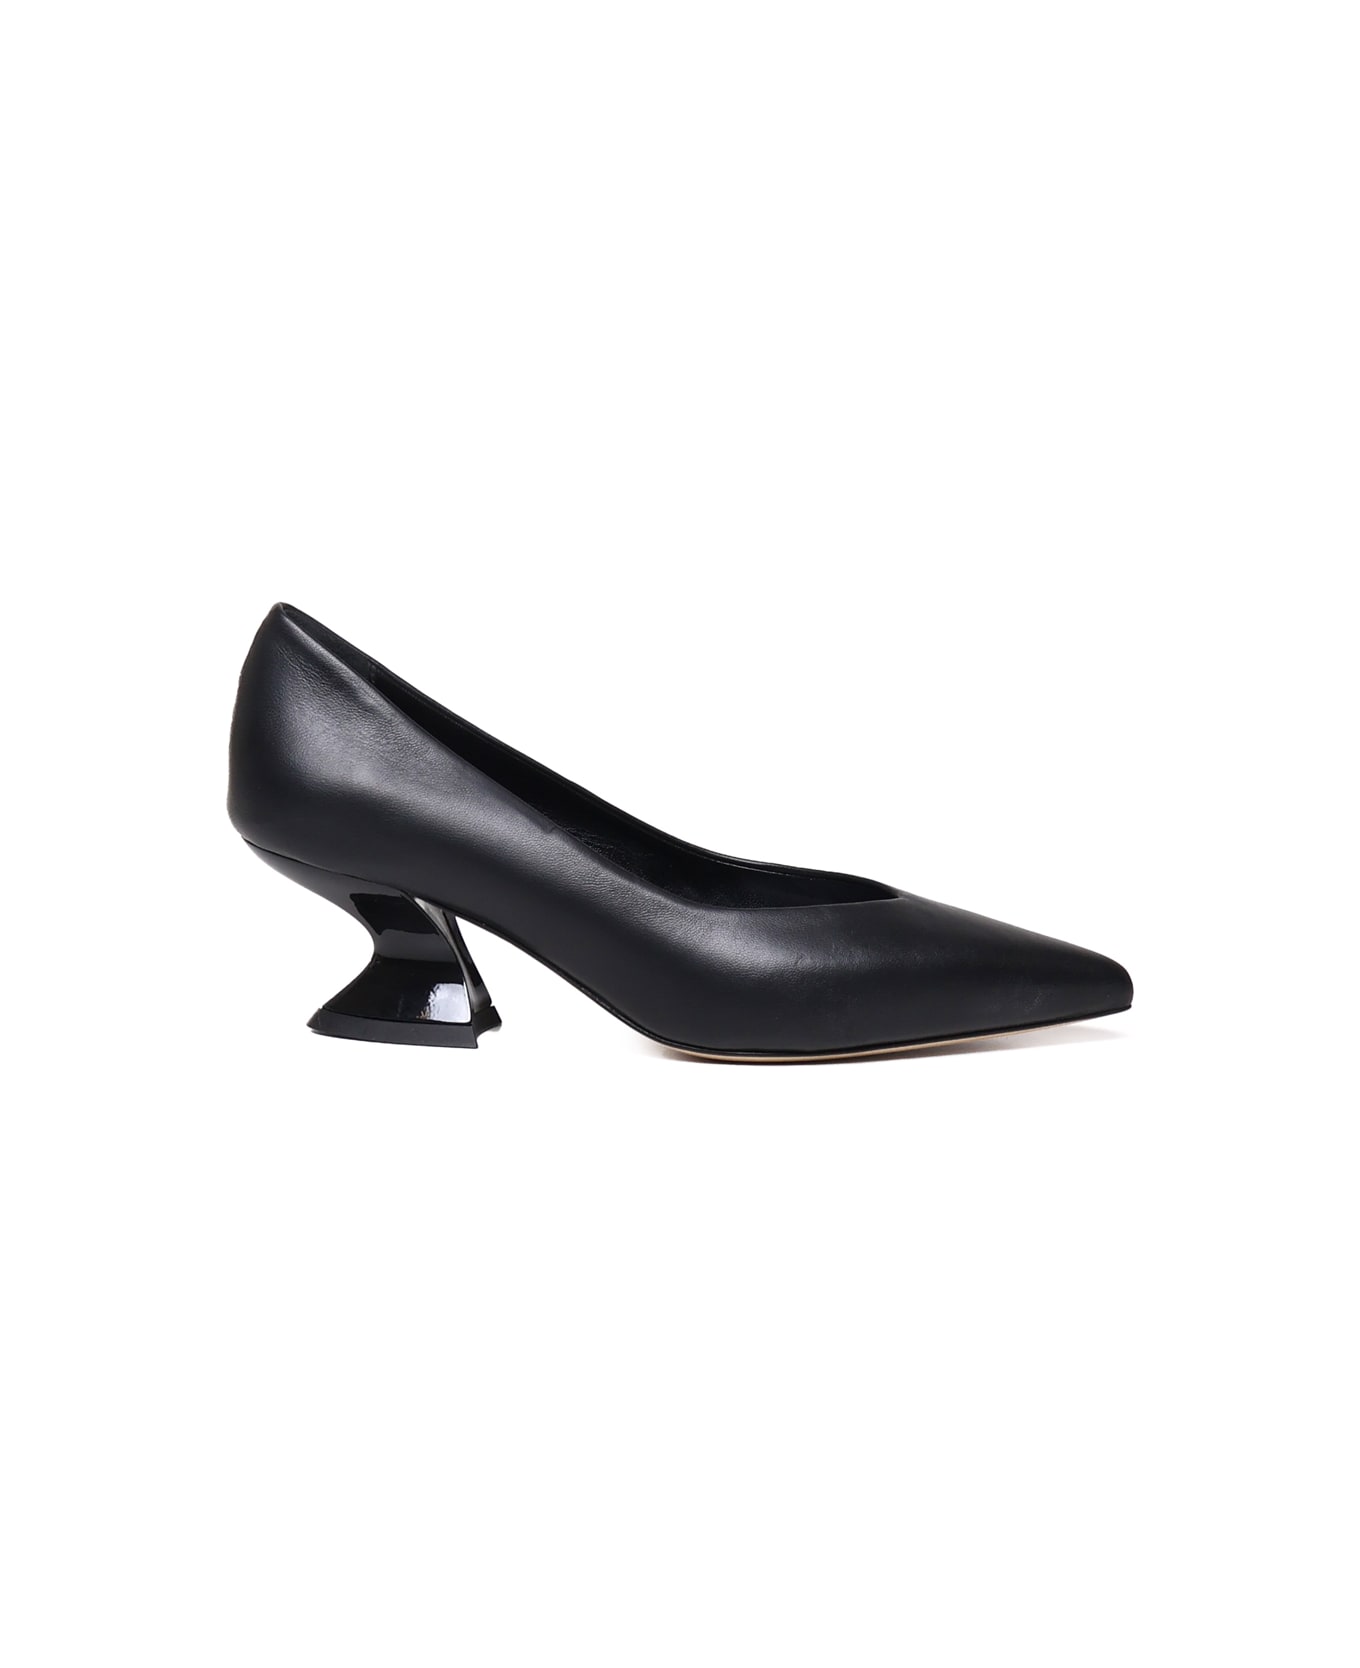 Alchimia Leather Pumps With Wide Heel - Black ハイヒール